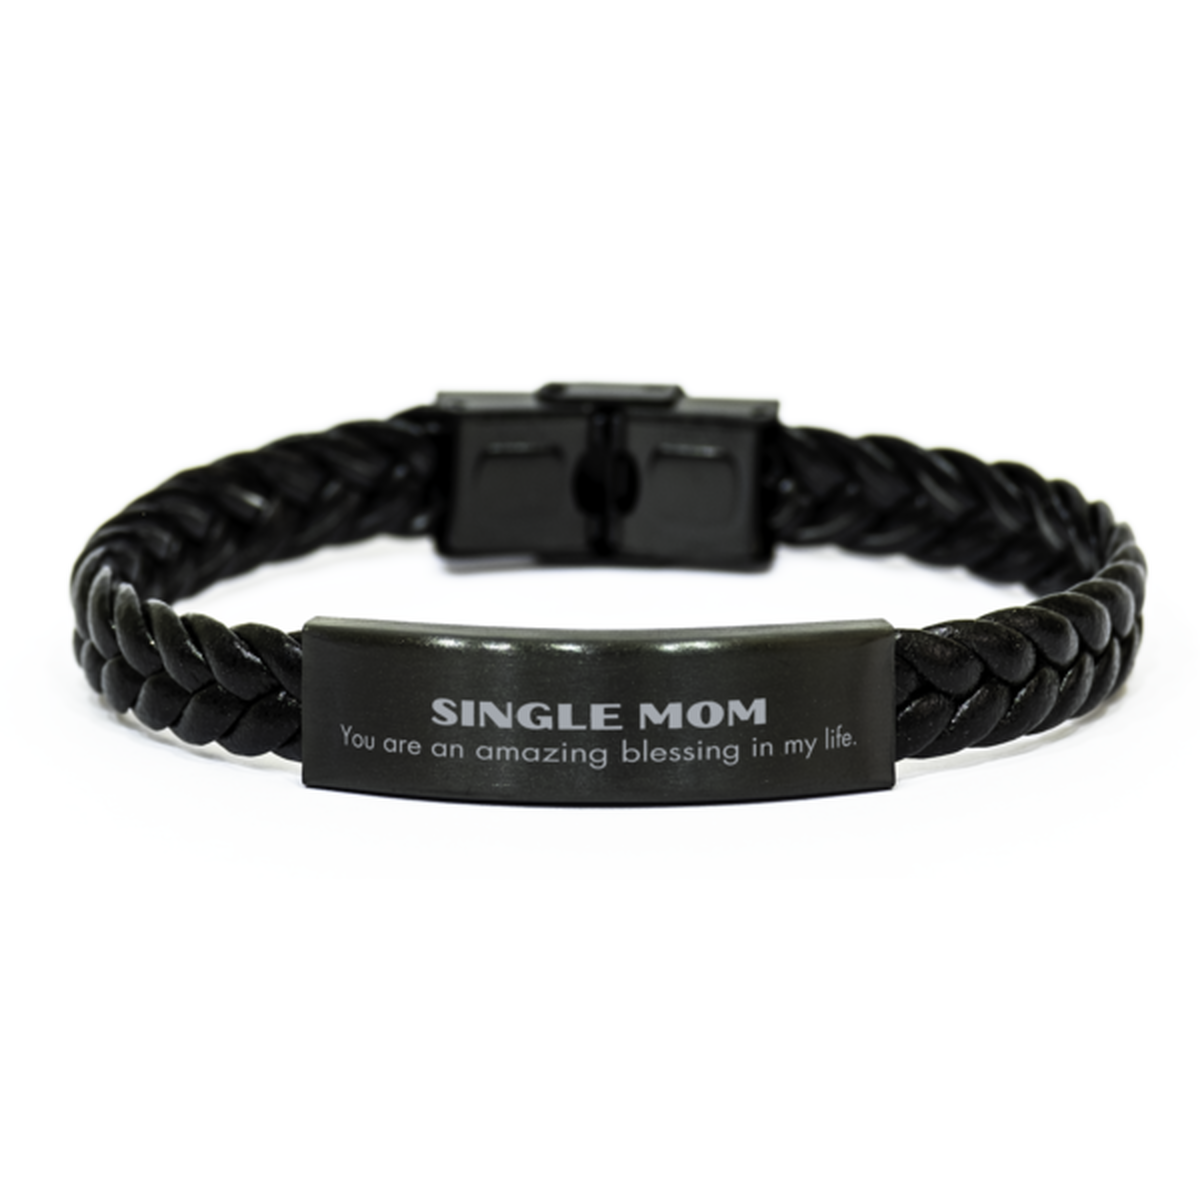 Single Mom Braided Leather Bracelet, You are an amazing blessing in my life, Thank You Gifts For Single Mom, Inspirational Birthday Christmas Unique Gifts For Single Mom